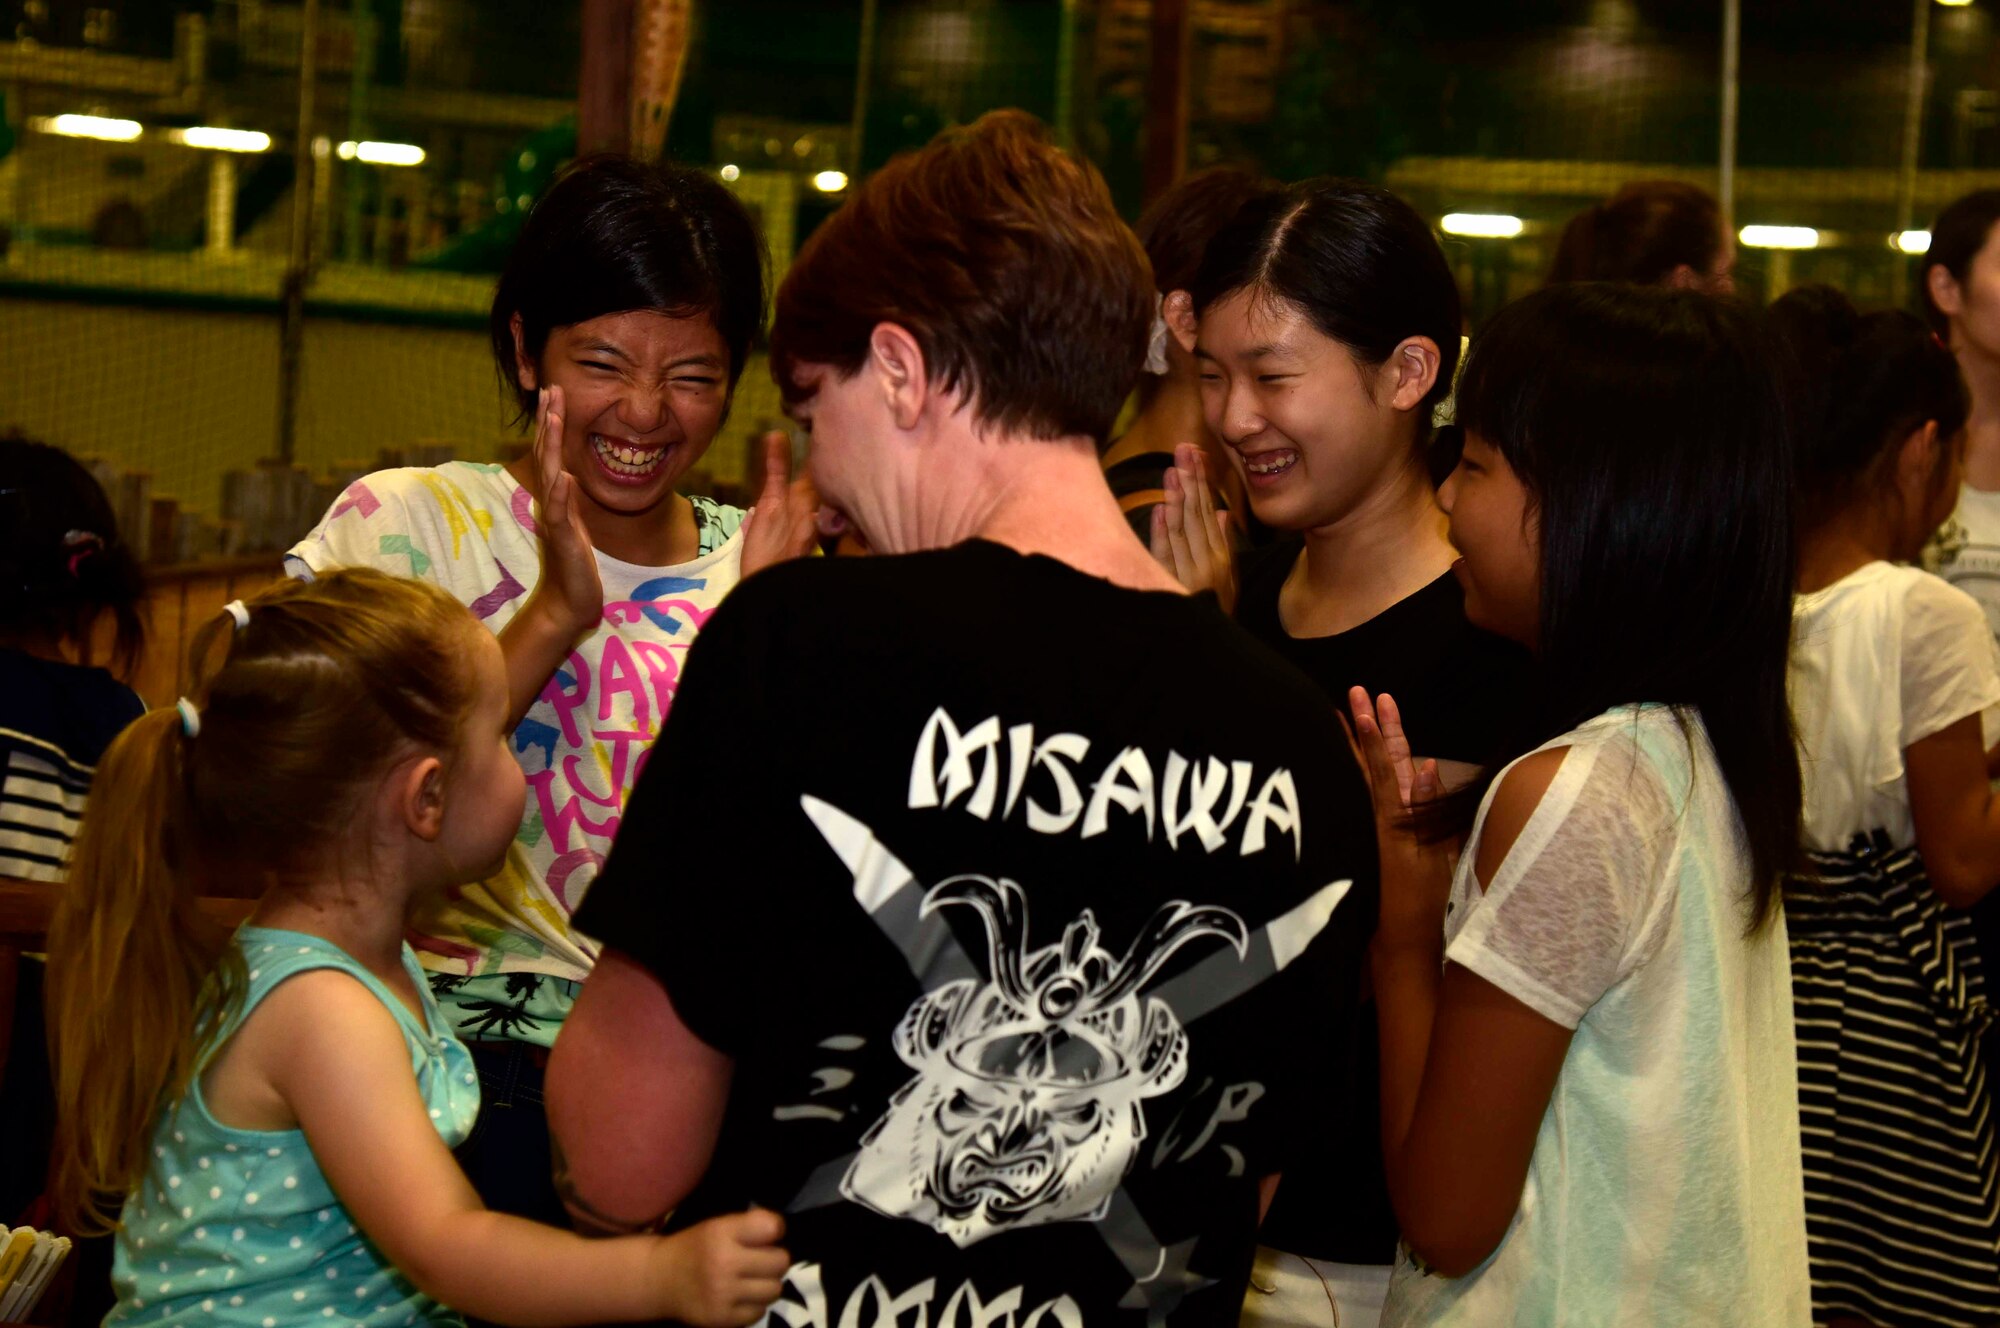 Lindsay Talbot, 35th Fighter Wing Staff Agencies unit program coordinator, interacts with children from the Shichinohe Children’s Home at Misawa Air Base, Japan, July 25, 2015. Eighteen volunteers, consisting of Airmen, Sailors and family members, spent the afternoon with the children supervising, playing games and hosting other activities. (U.S. Air Force photo by Airman 1st Class Jordyn Fetter/Released)